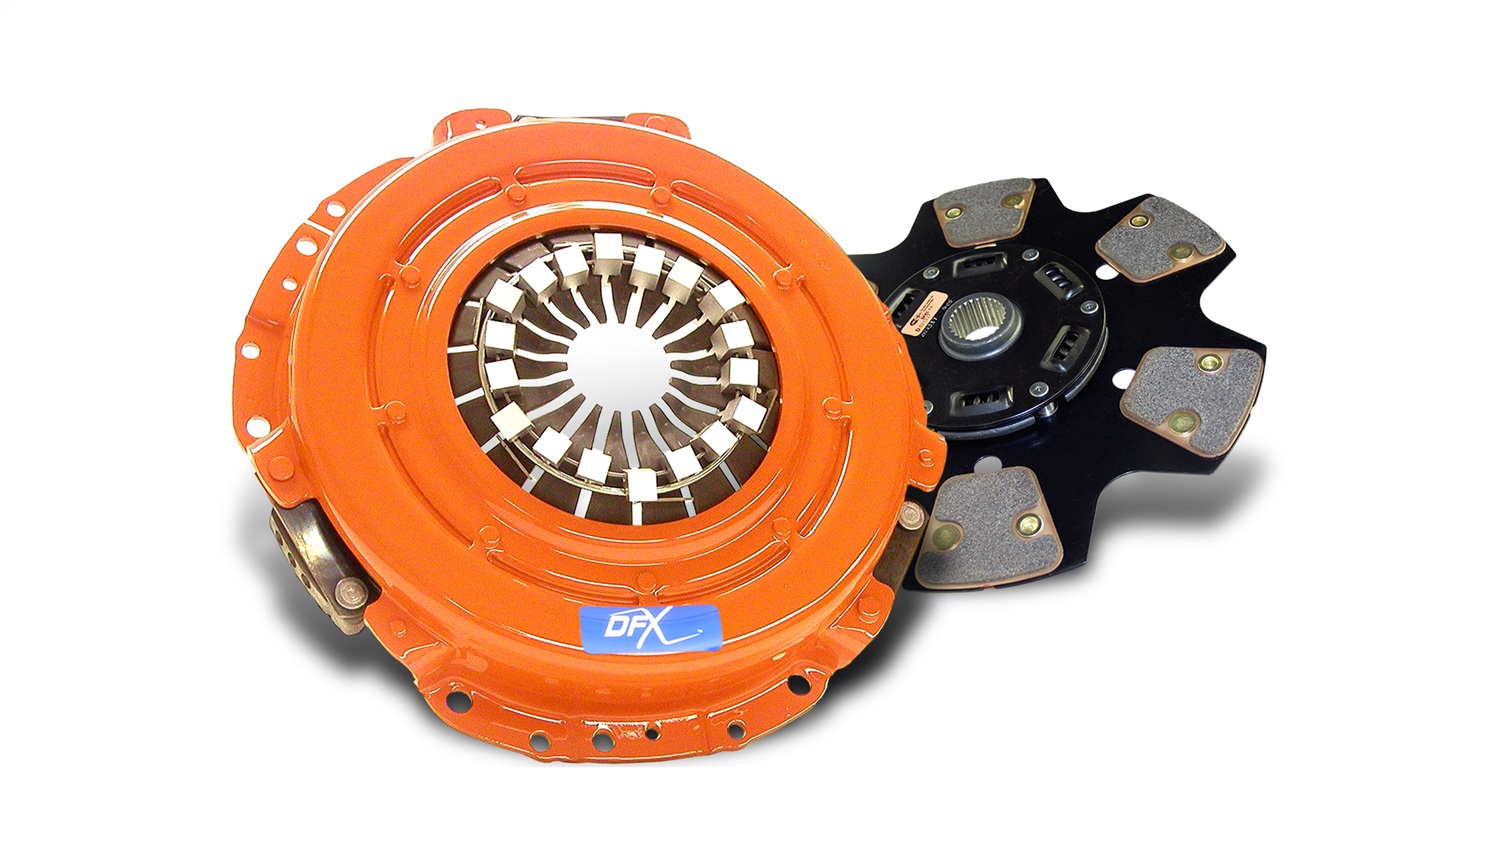 Centerforce 315161830 DFX Clutch Pressure Plate And Disc Set